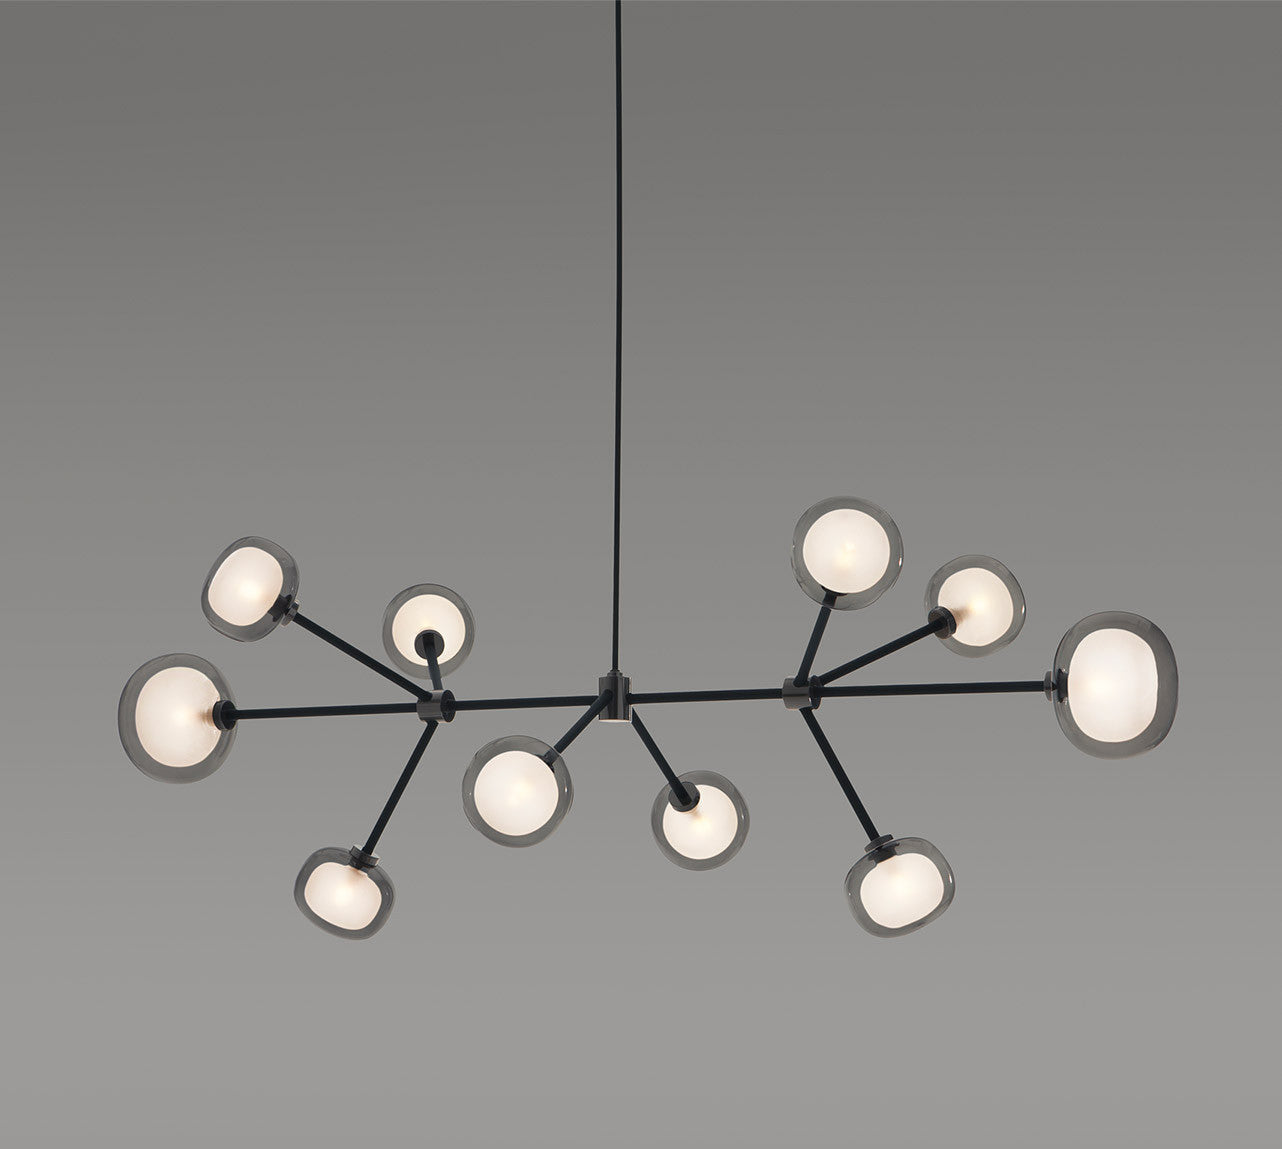 NABILA CHANDELIER 552.10 BY TOOY from $3,738.00